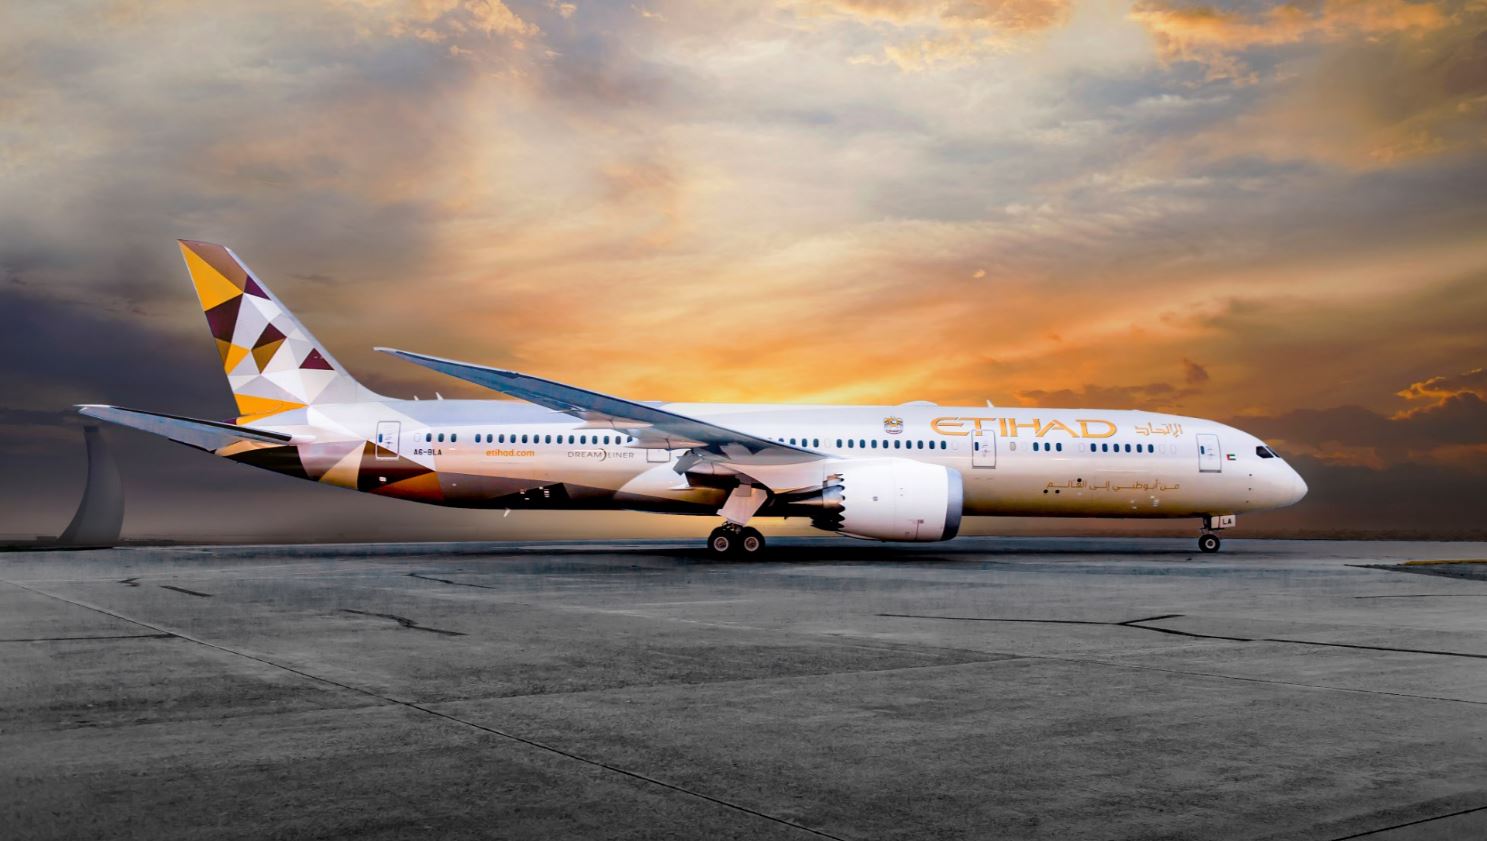 Etihad Airways to Deploy Latest Generation 787 Dreamliners on All Its Flights to China